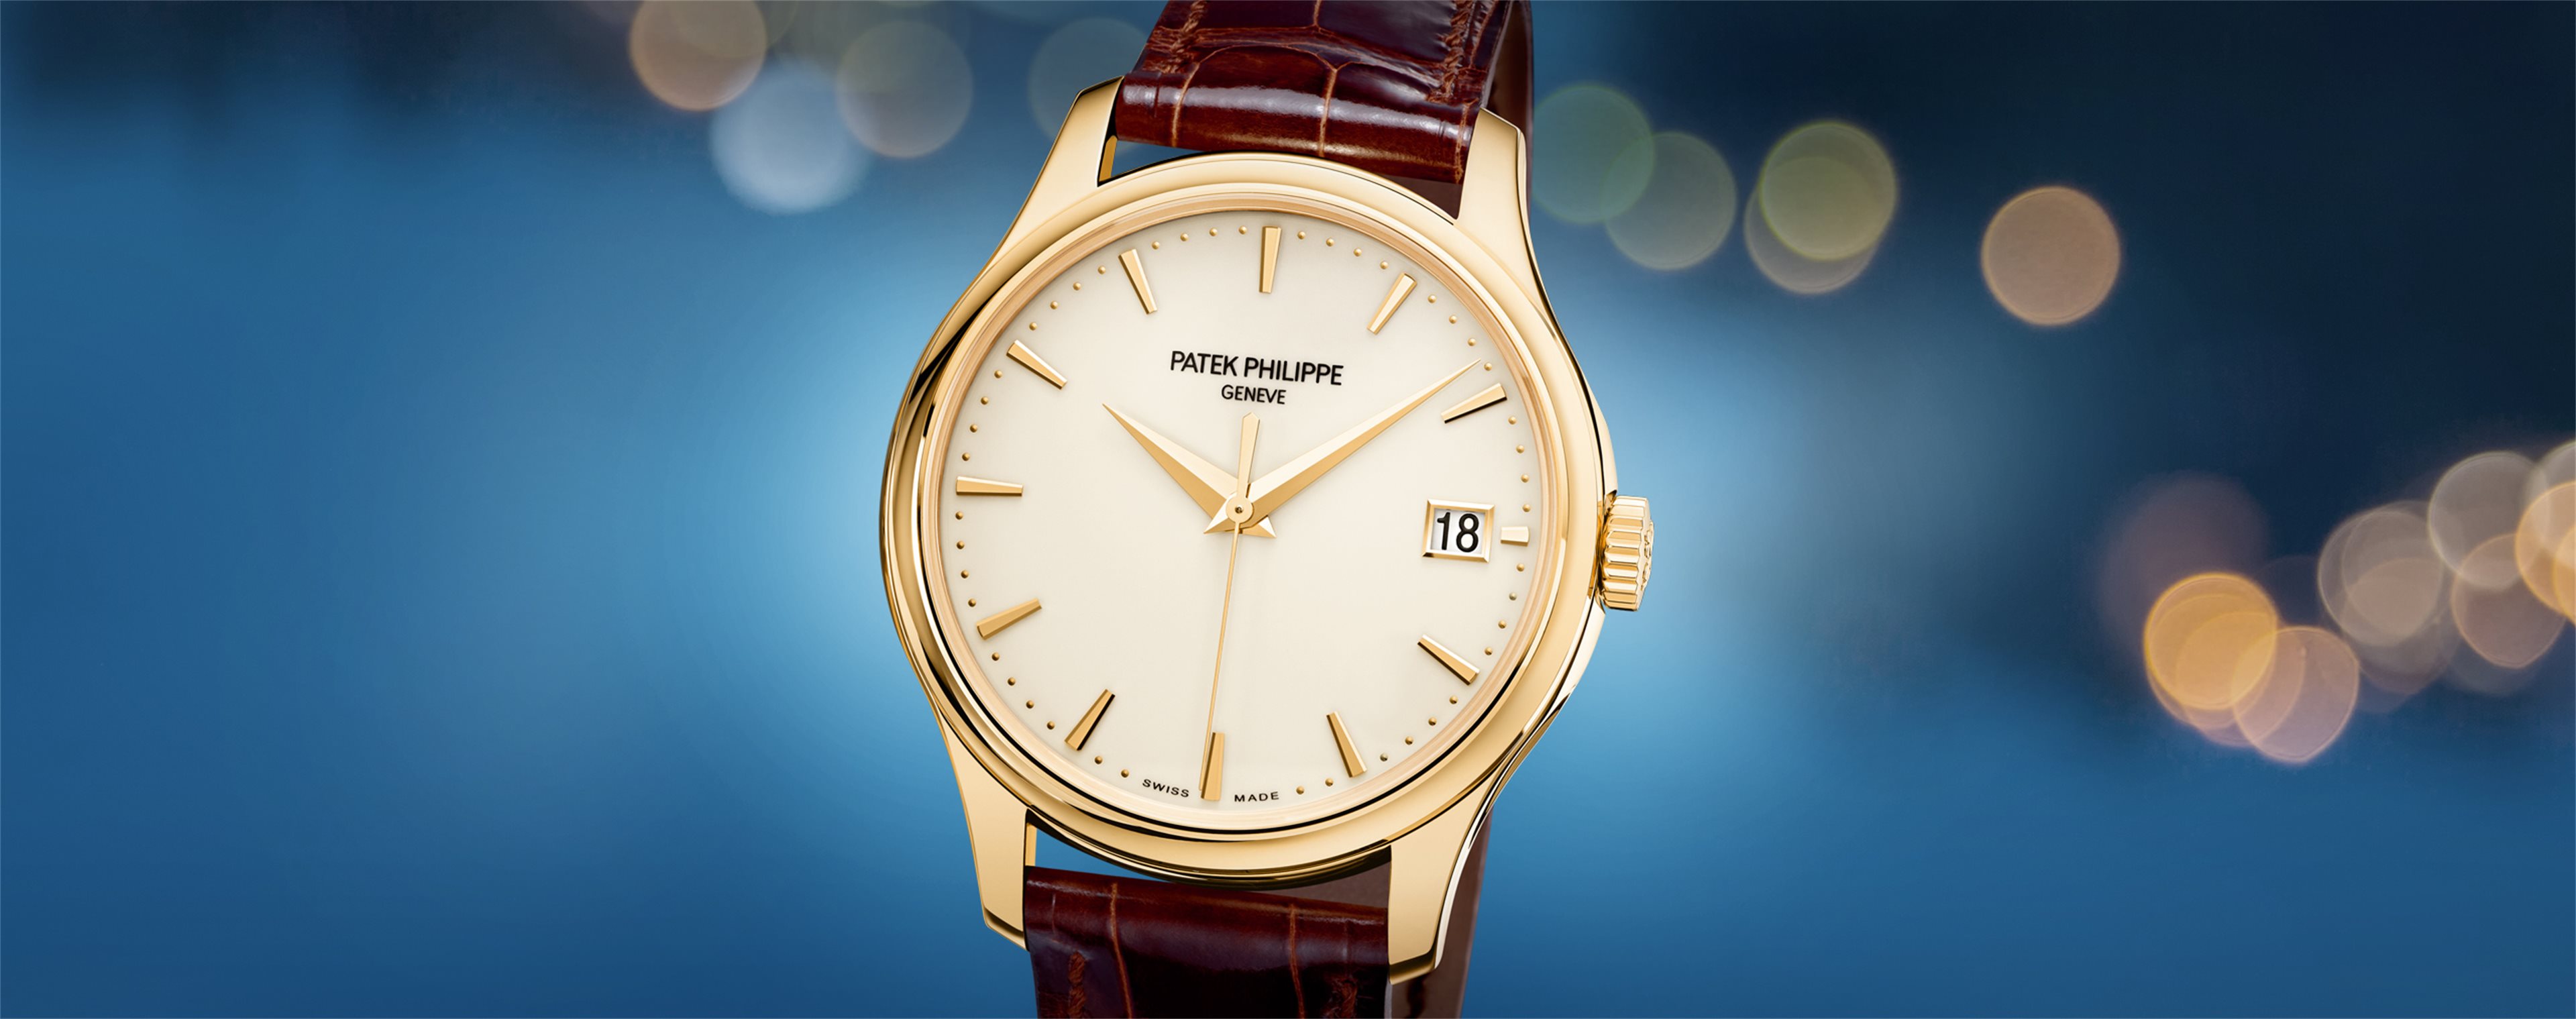 Best Fake Patek Philippe Watches With Boxes